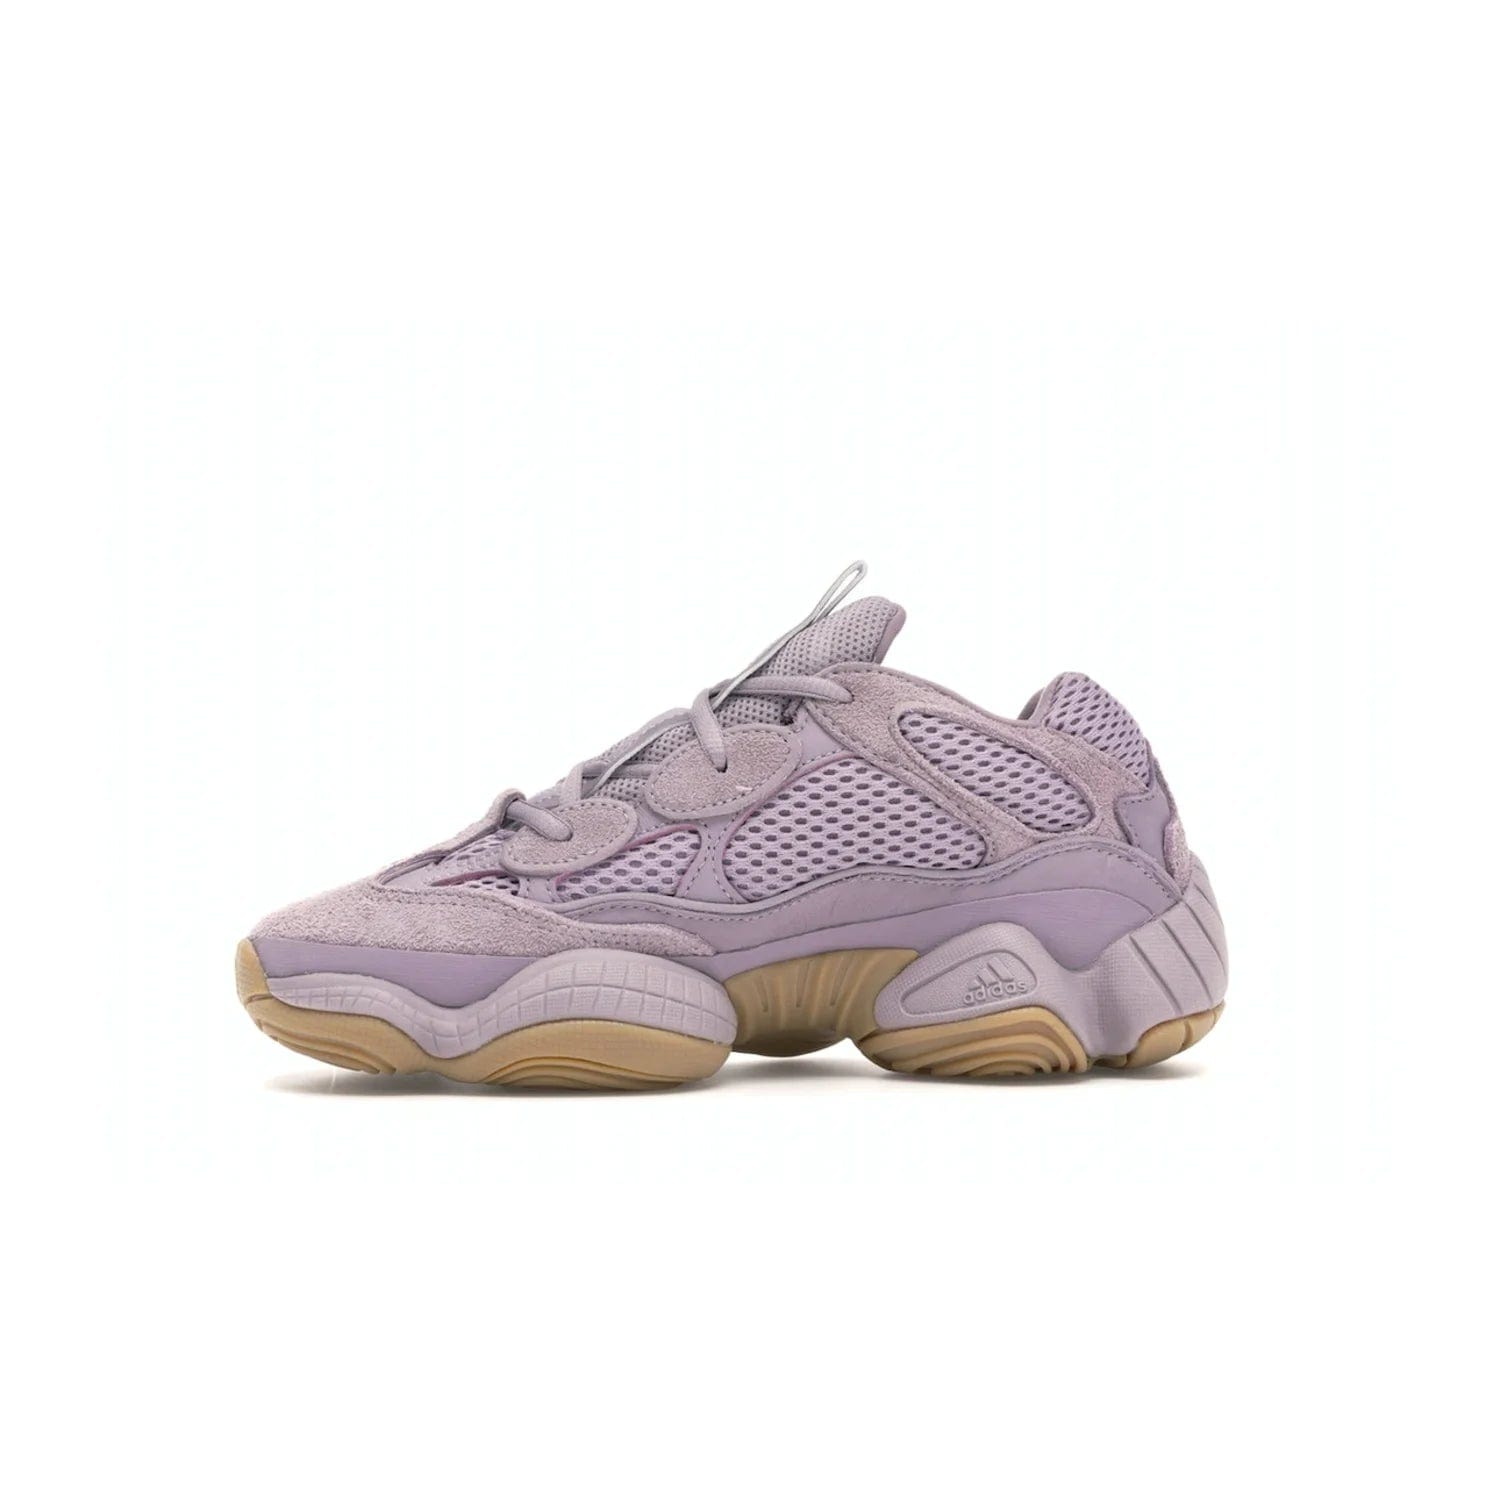 adidas Yeezy 500 Soft Vision - Image 18 - Only at www.BallersClubKickz.com - New adidas Yeezy 500 Soft Vision sneaker featuring a combination of mesh, leather, and suede in a classic Soft Vision colorway. Gum rubber outsole ensures durability and traction. An everyday sneaker that stands out from the crowd.